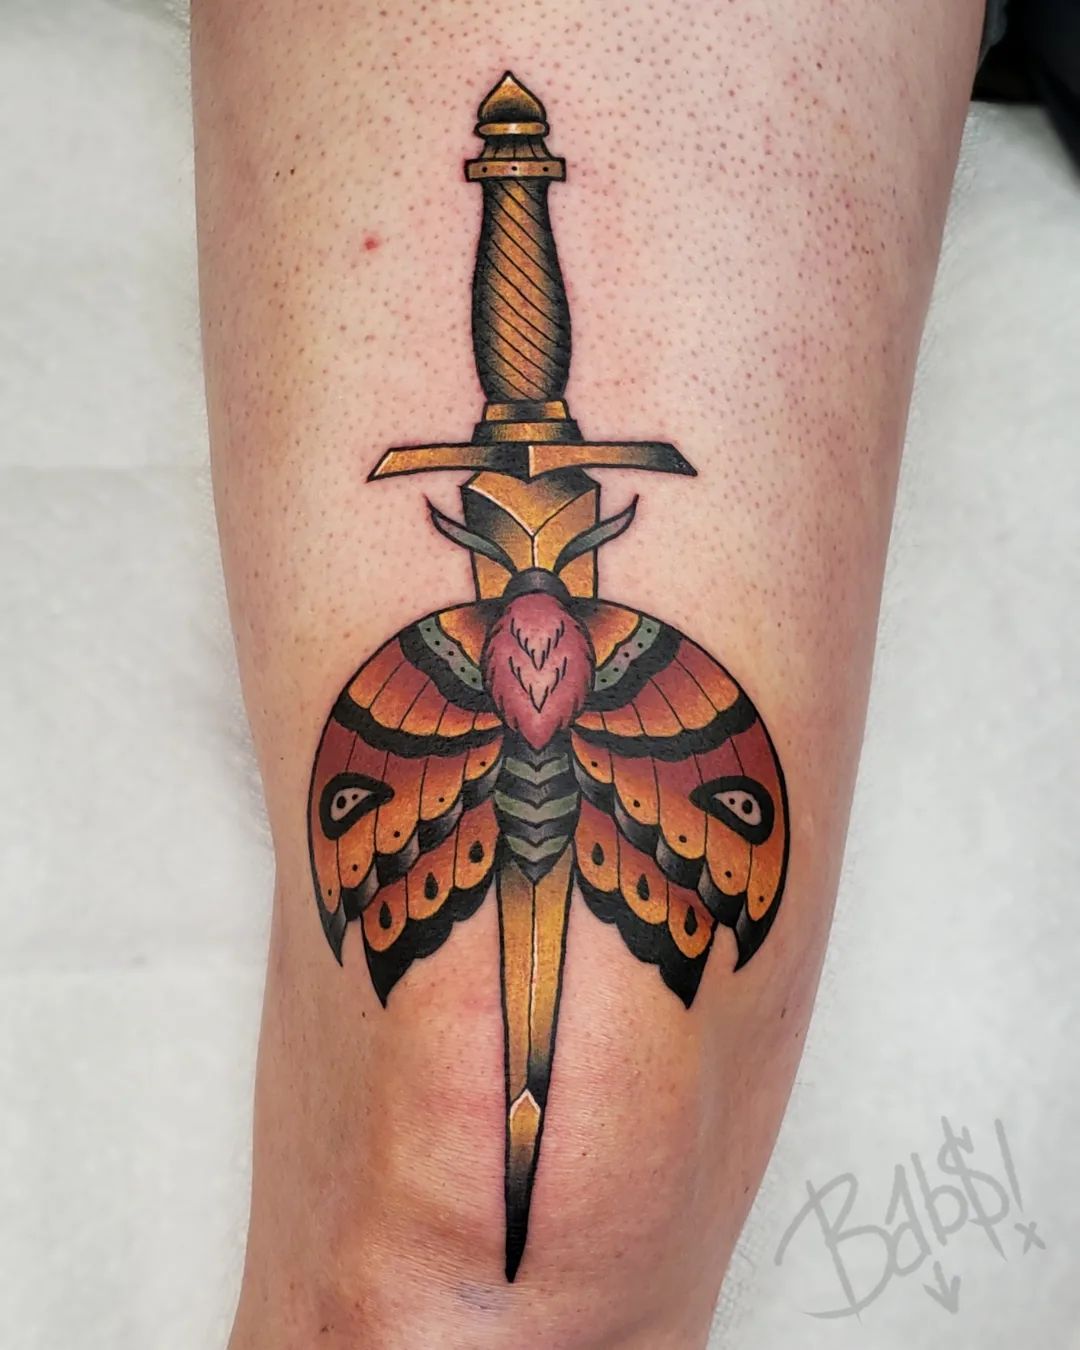 Swords can symbolize a lot of things. This colorful print is used to describe your new renewal, strengths, as well as weaknesses that can shape you. If you’re a natural-born warrior, this knee tattoo is for you. Stick to this bright colorful print if you fancy larger and more noticeable ideas.